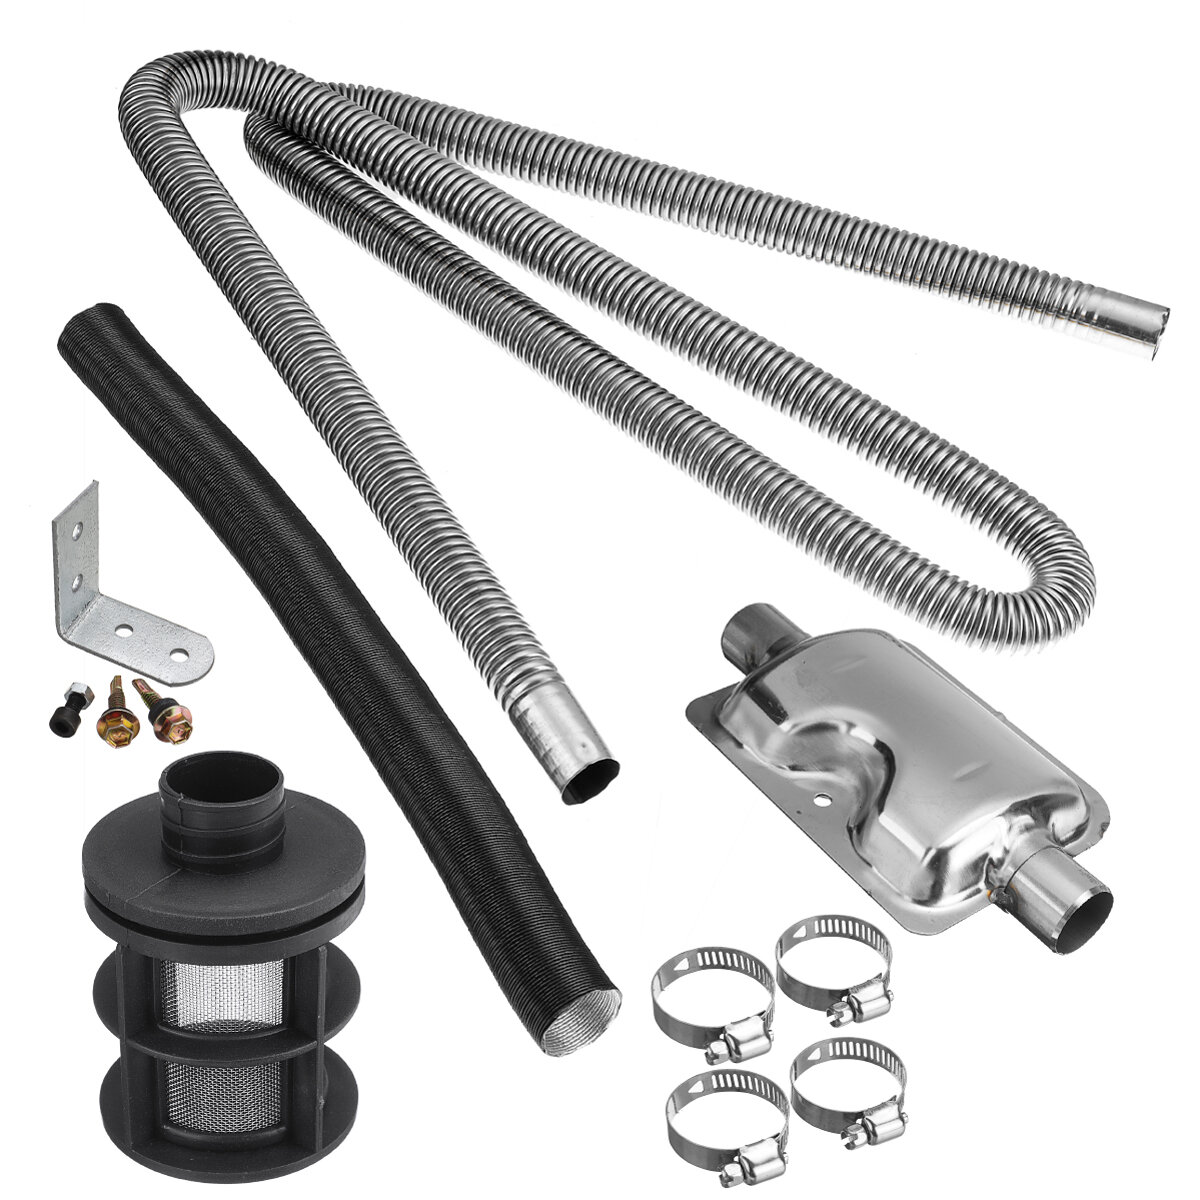 Stainless Exhaust Muffler Silencer Clamps Bracket Gas Vent Hose Portable 180cm Pipe Silence For Air 